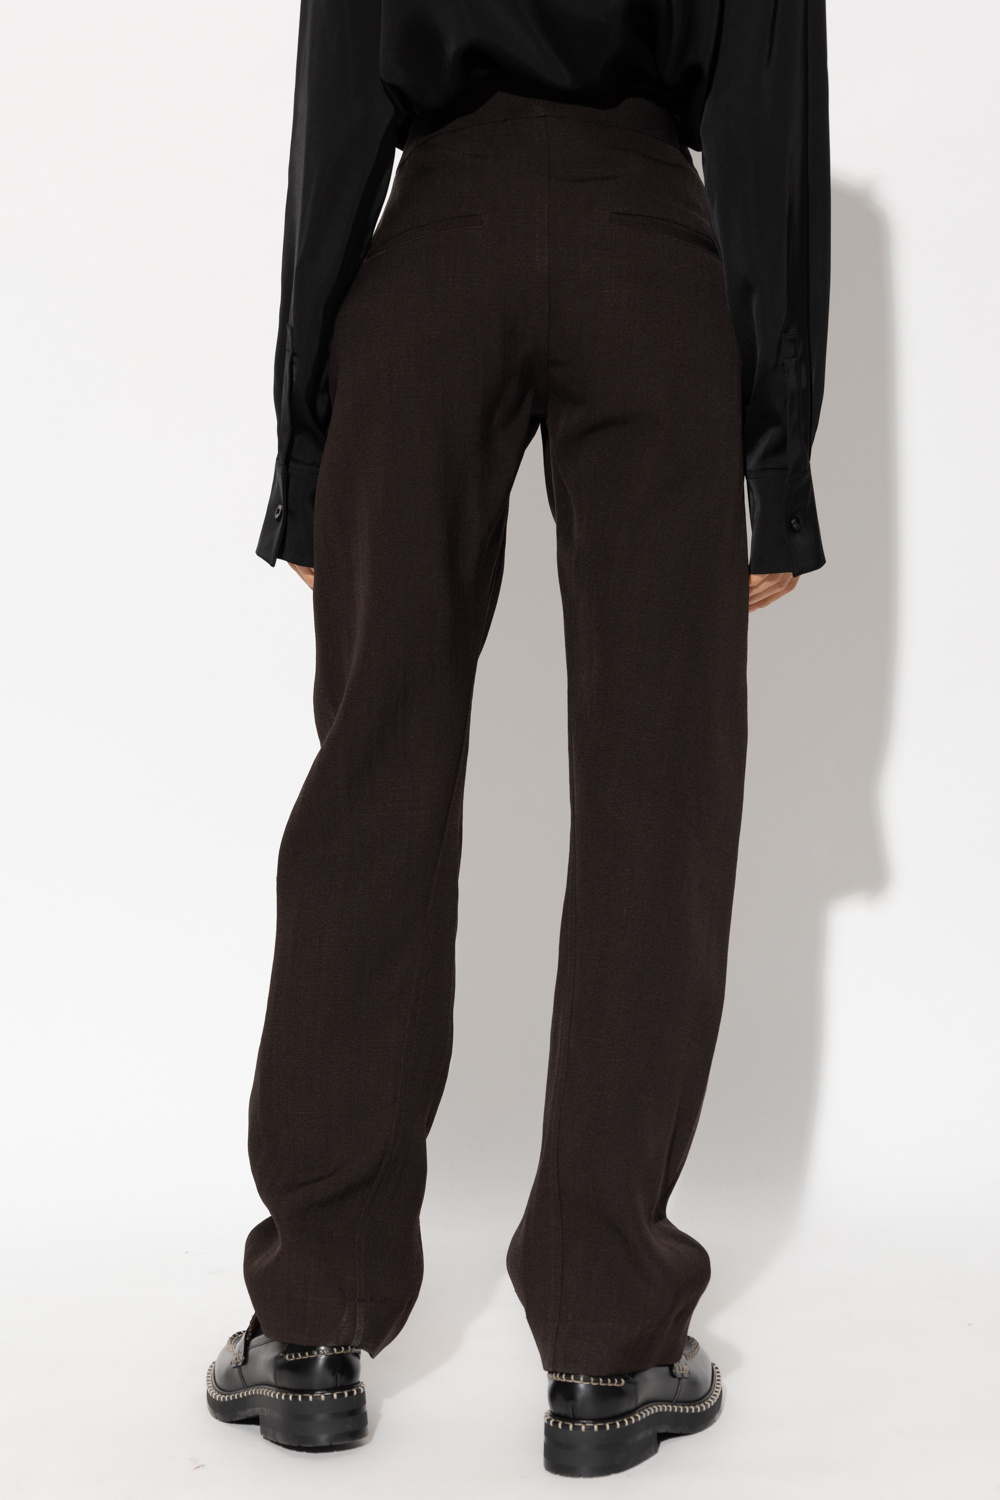 JIL SANDER Chiffon trousers with tapered legs